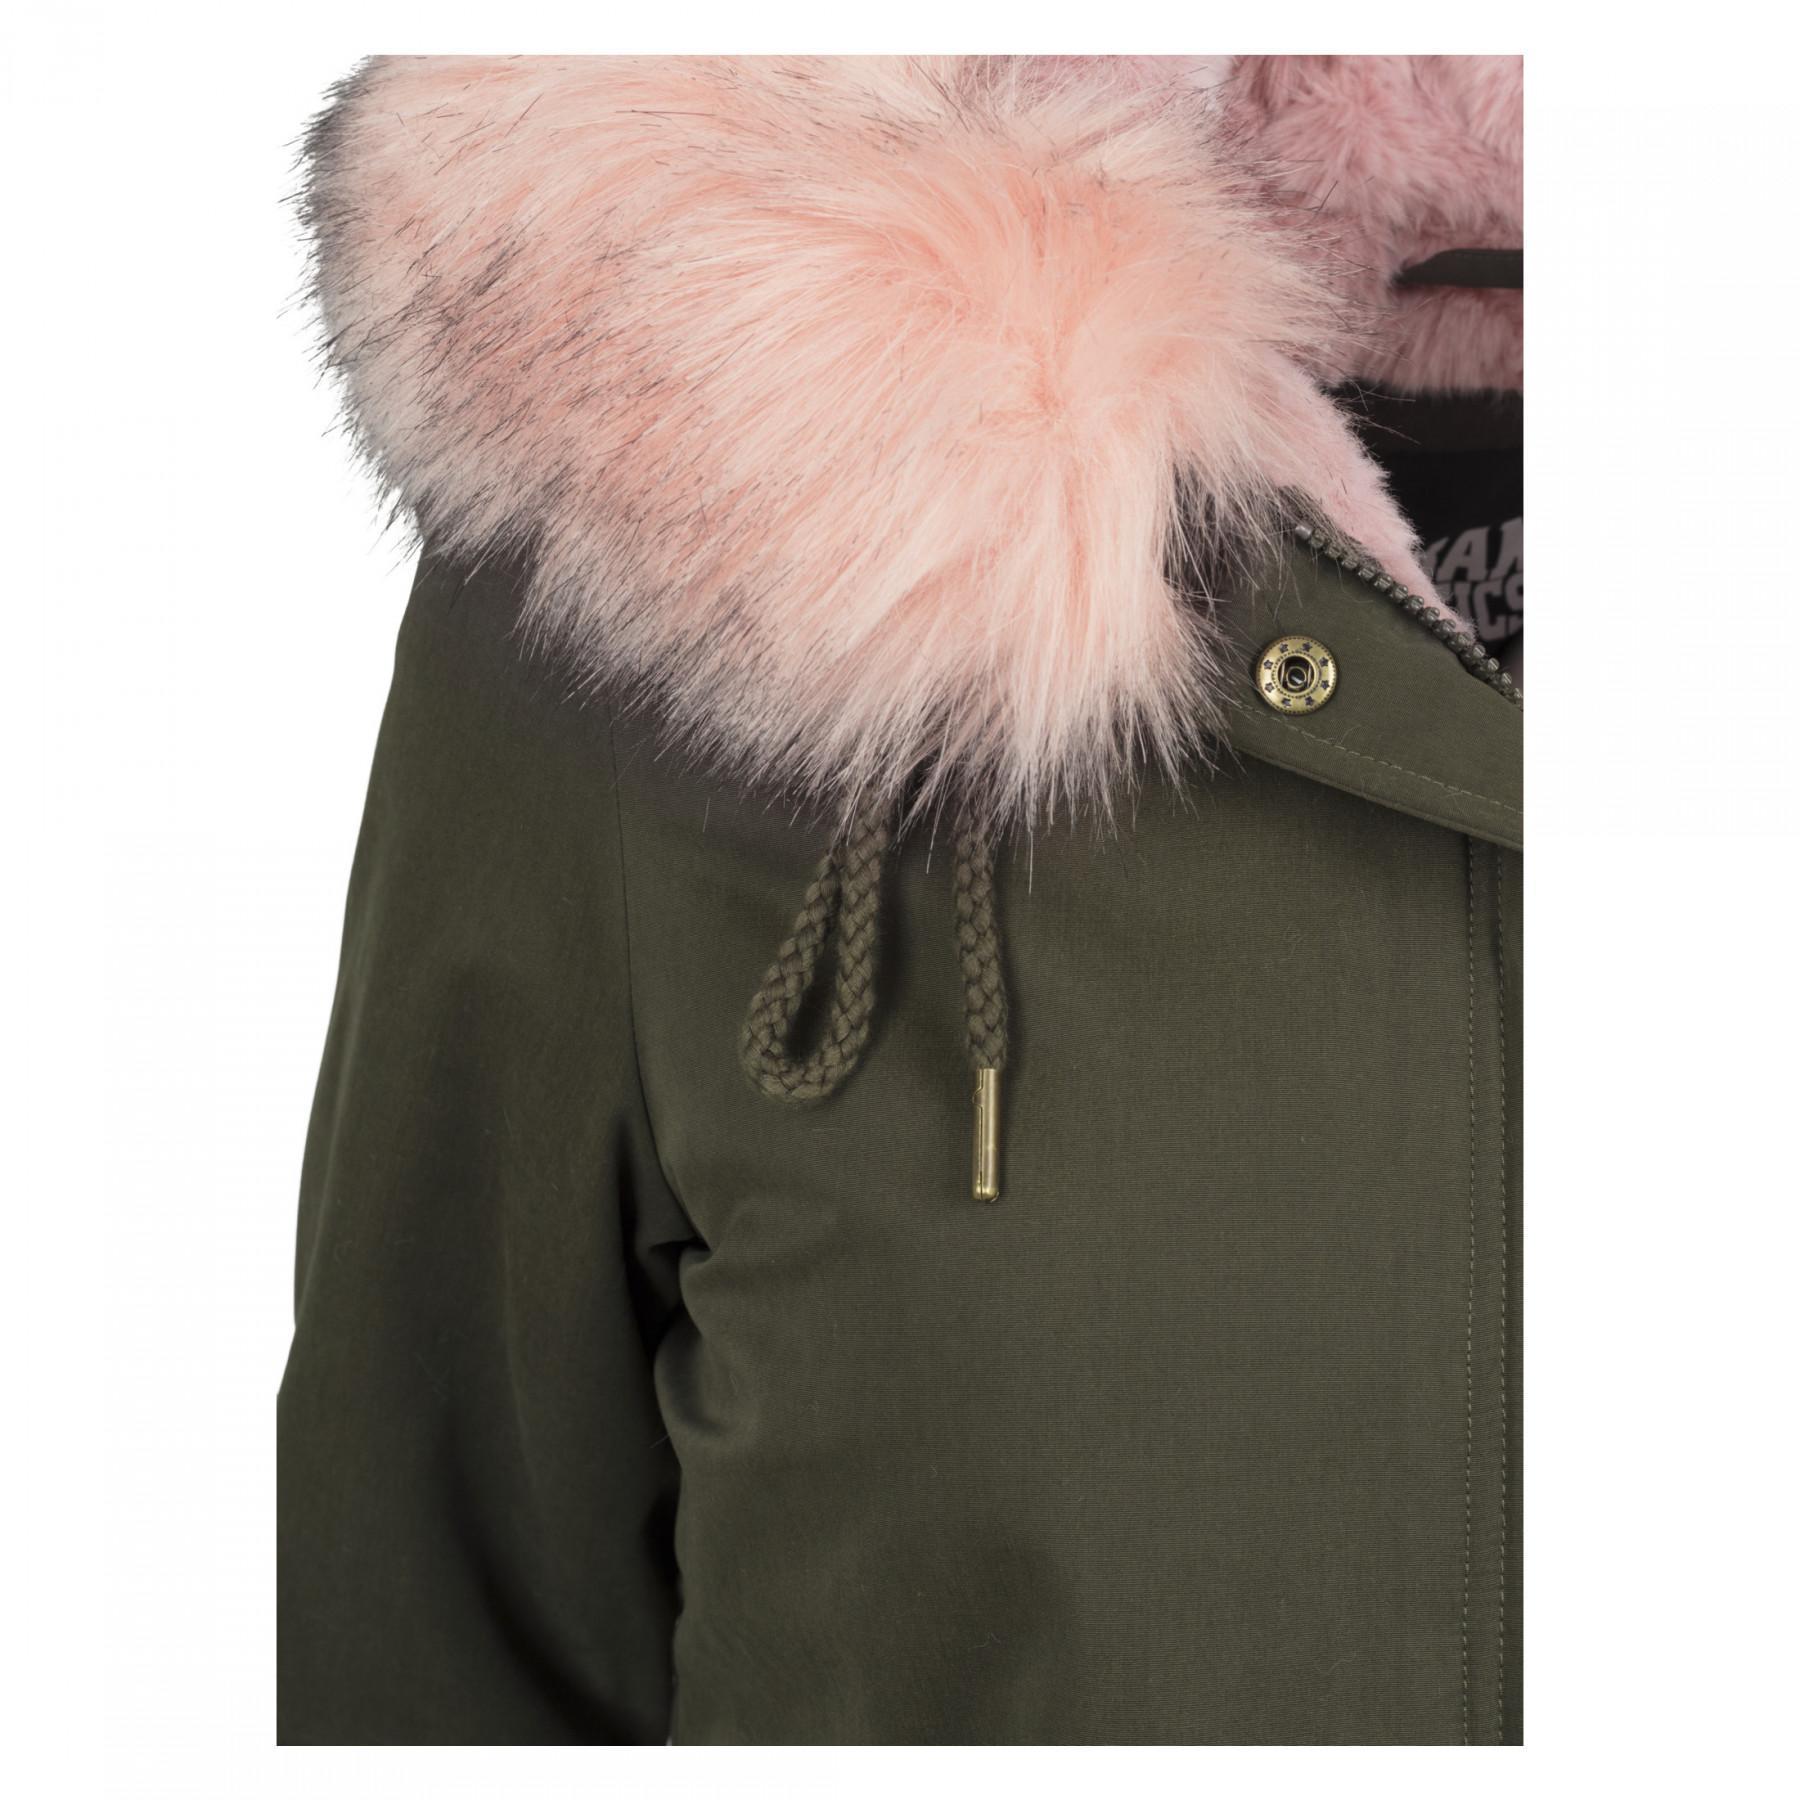 Women's Urban Classic lined parka